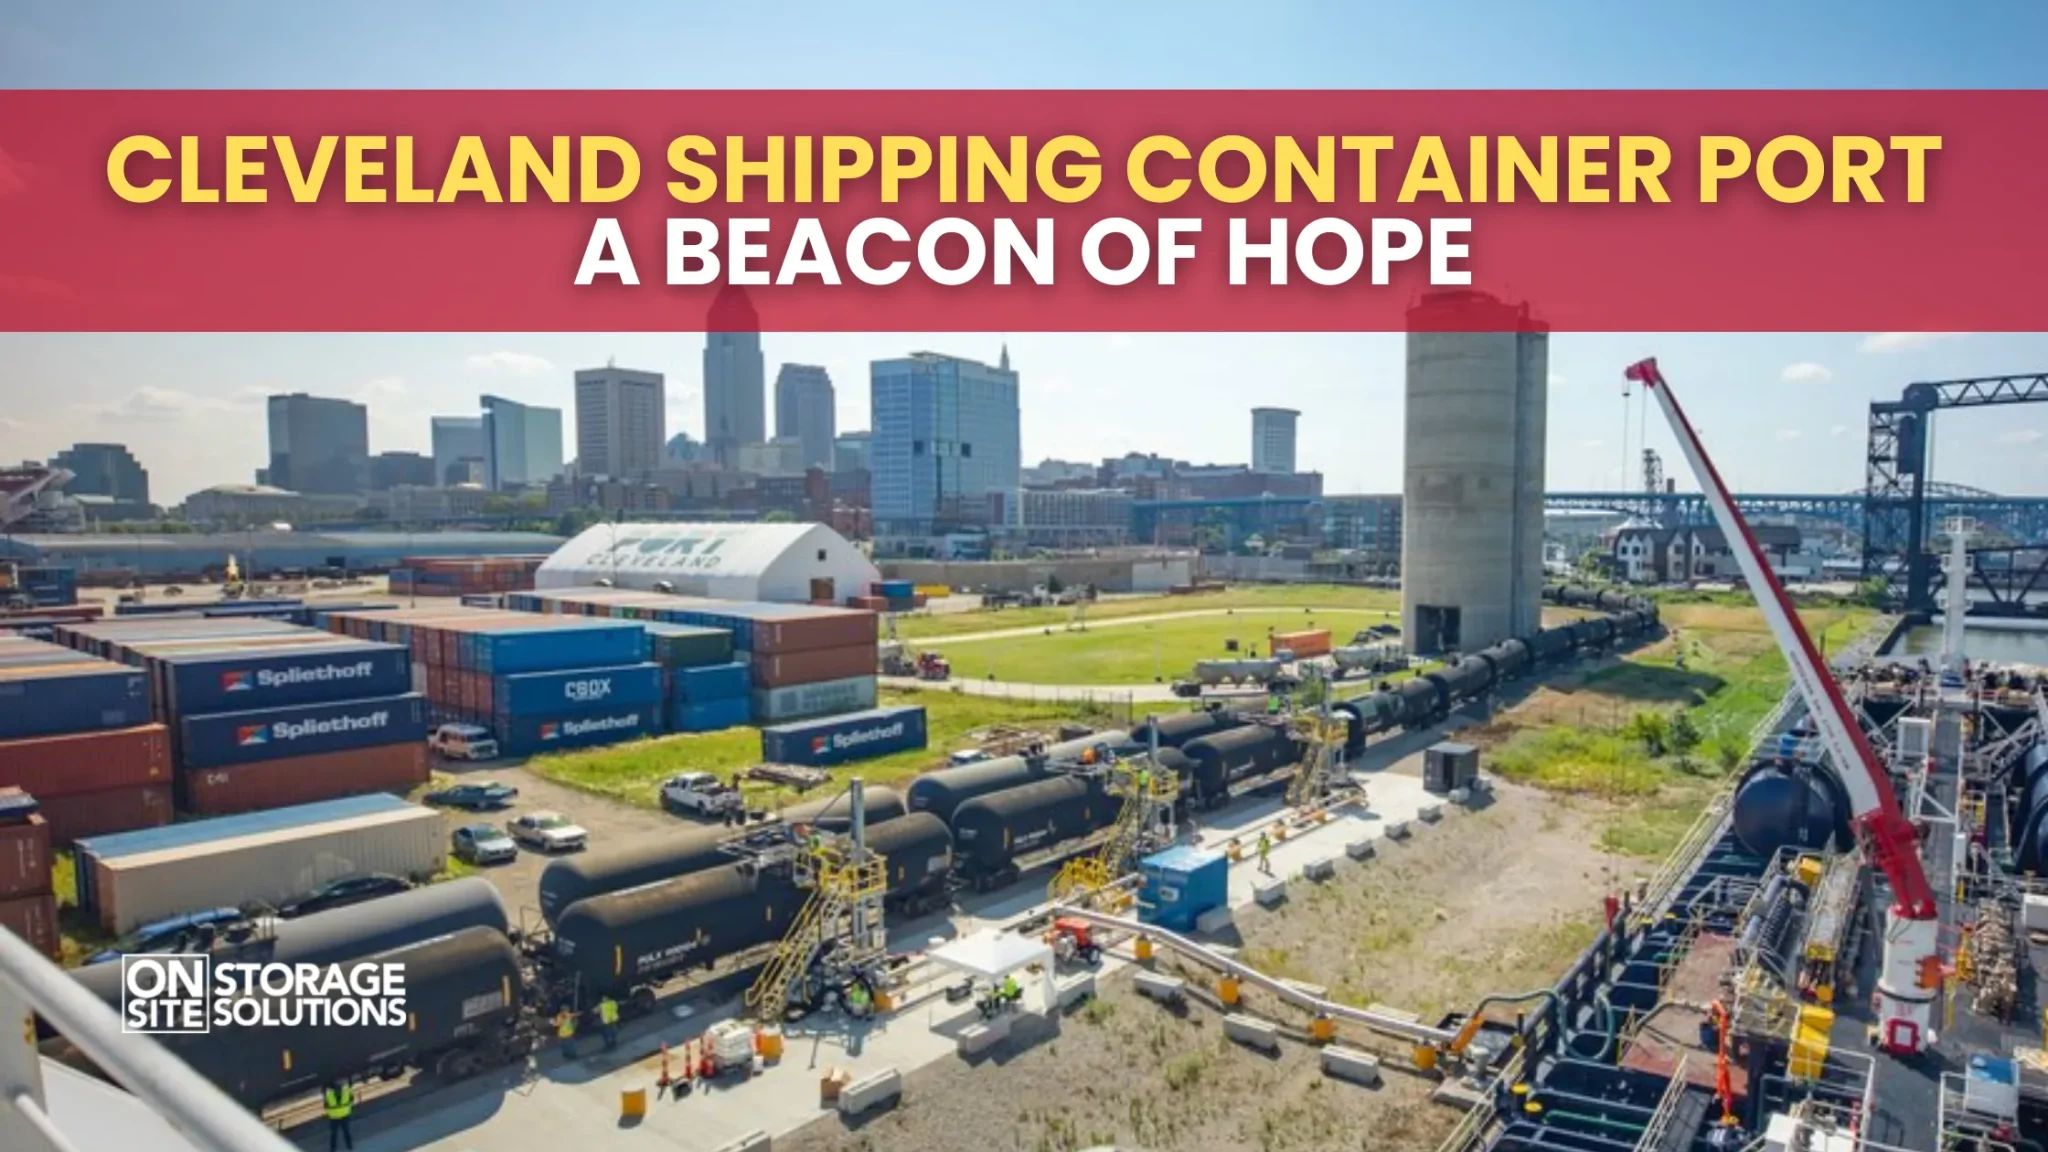 Cleveland Shipping Container Port – A Beacon of Hope